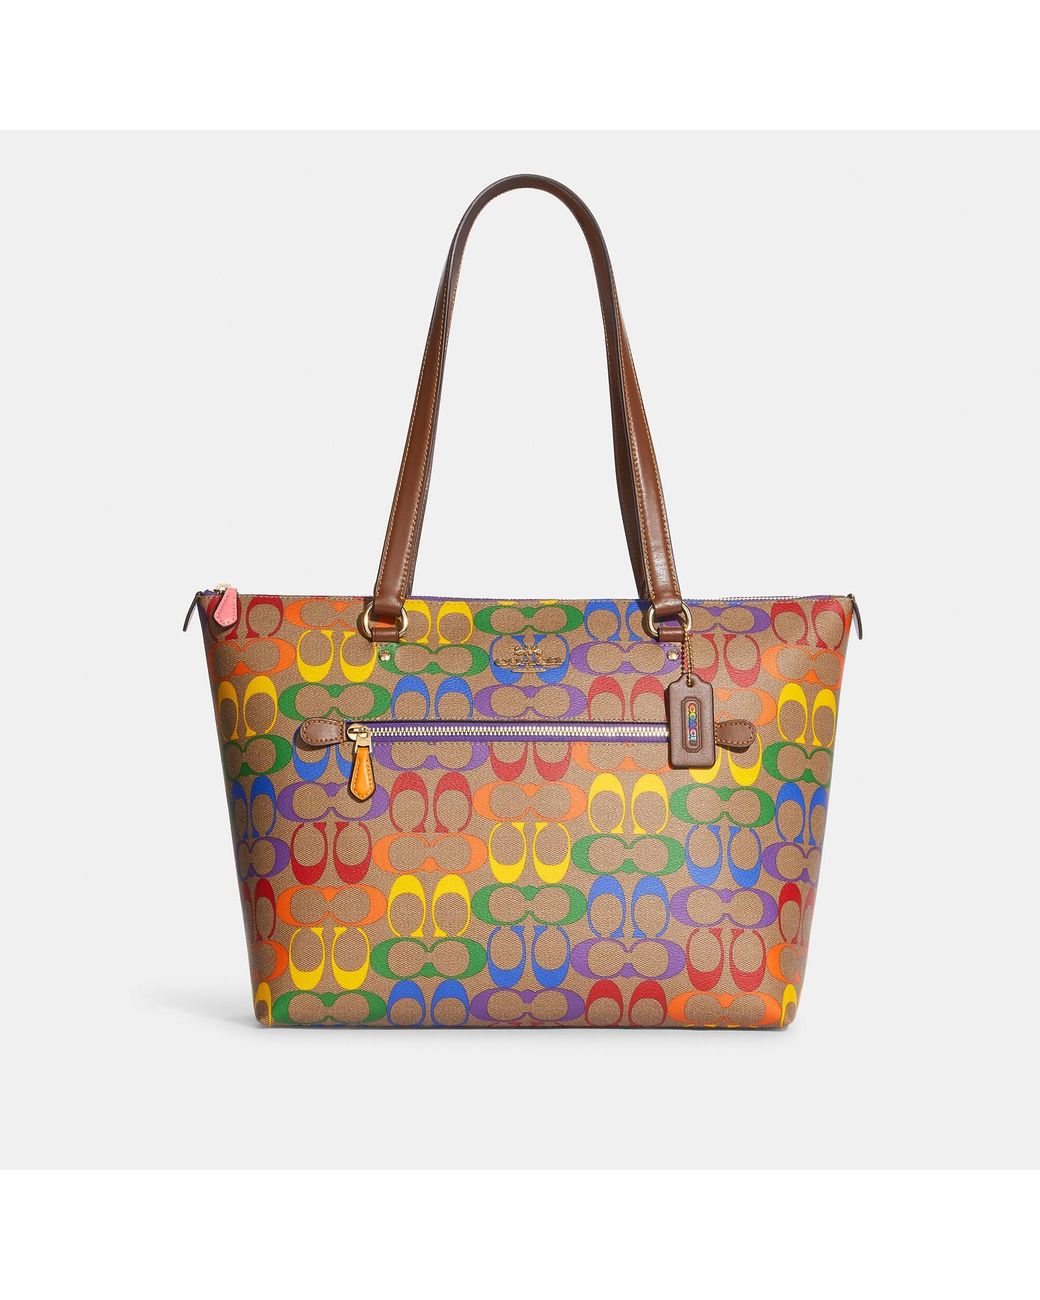 Coach Outlet Gallery Tote